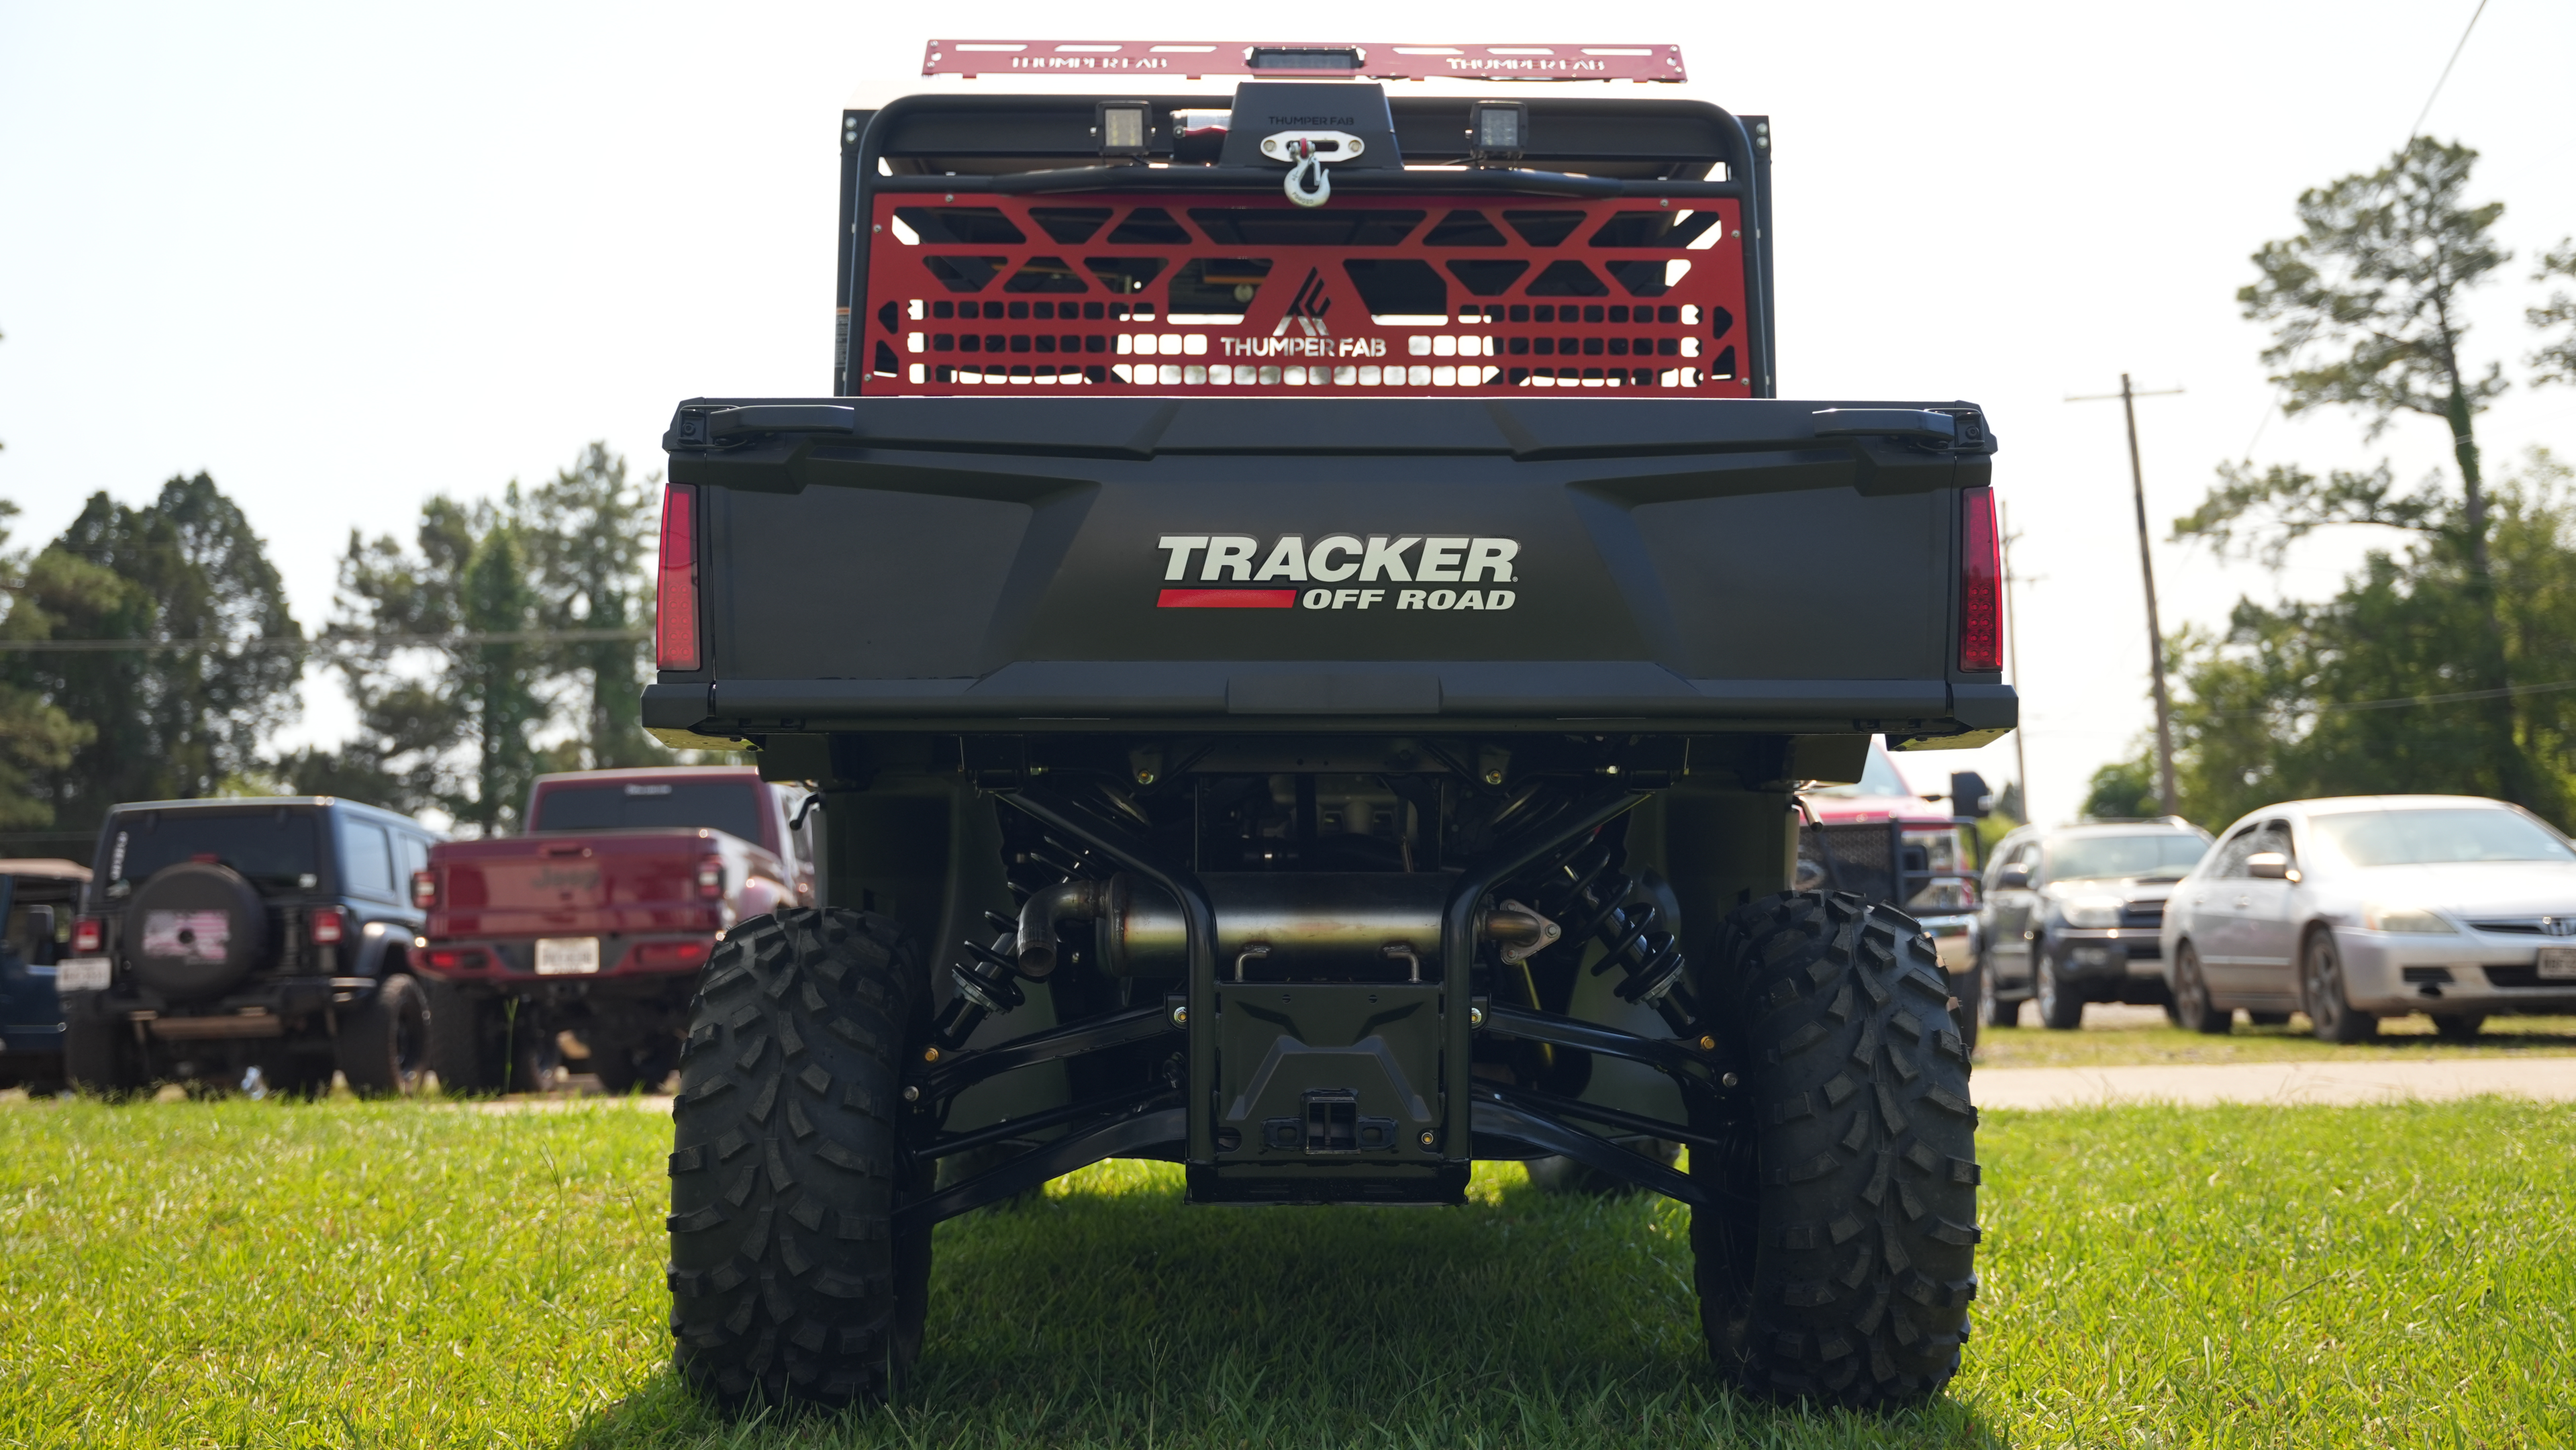 Plenty of ground clearance with the Tracker 800sx and loaded with Thumper Fab utv accessories. Choose from the huge selection of utv accessories.